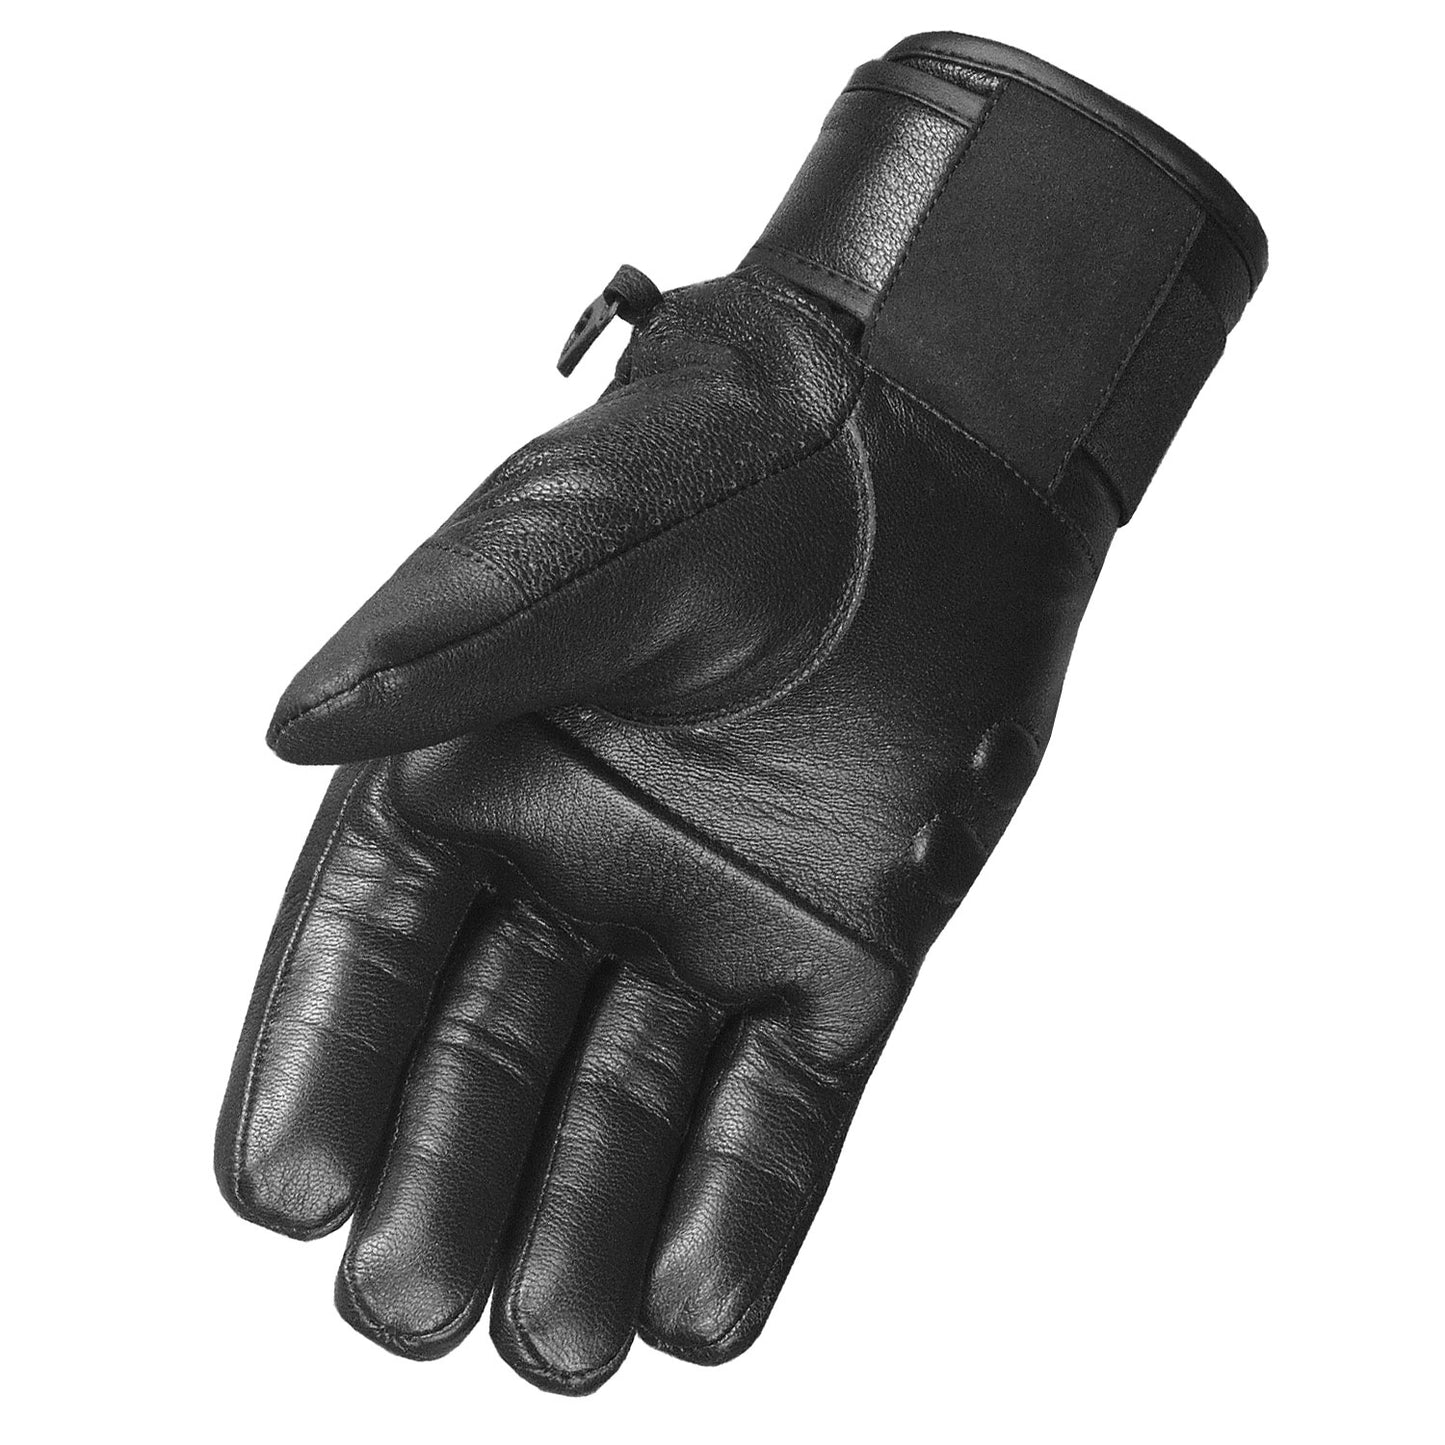 Men's New Motorcycle Leather Armor Gel Padded Ventilated Reflective Gloves Black Red